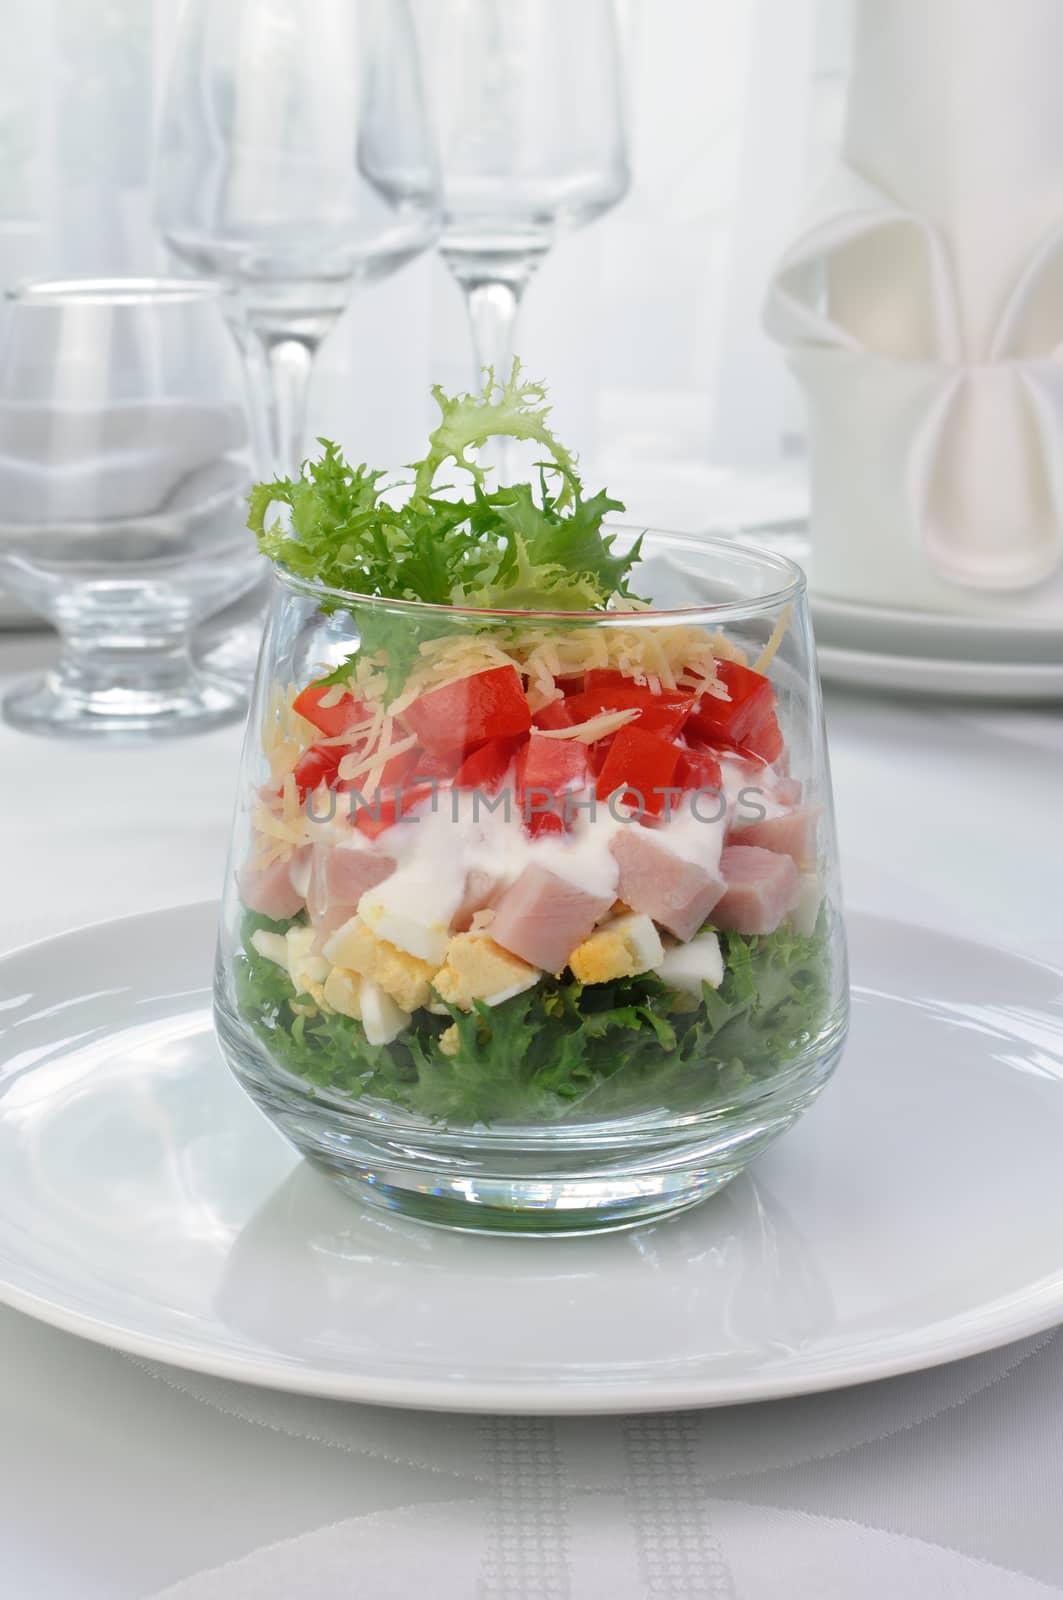 Multi-layer salad in a glass by Apolonia